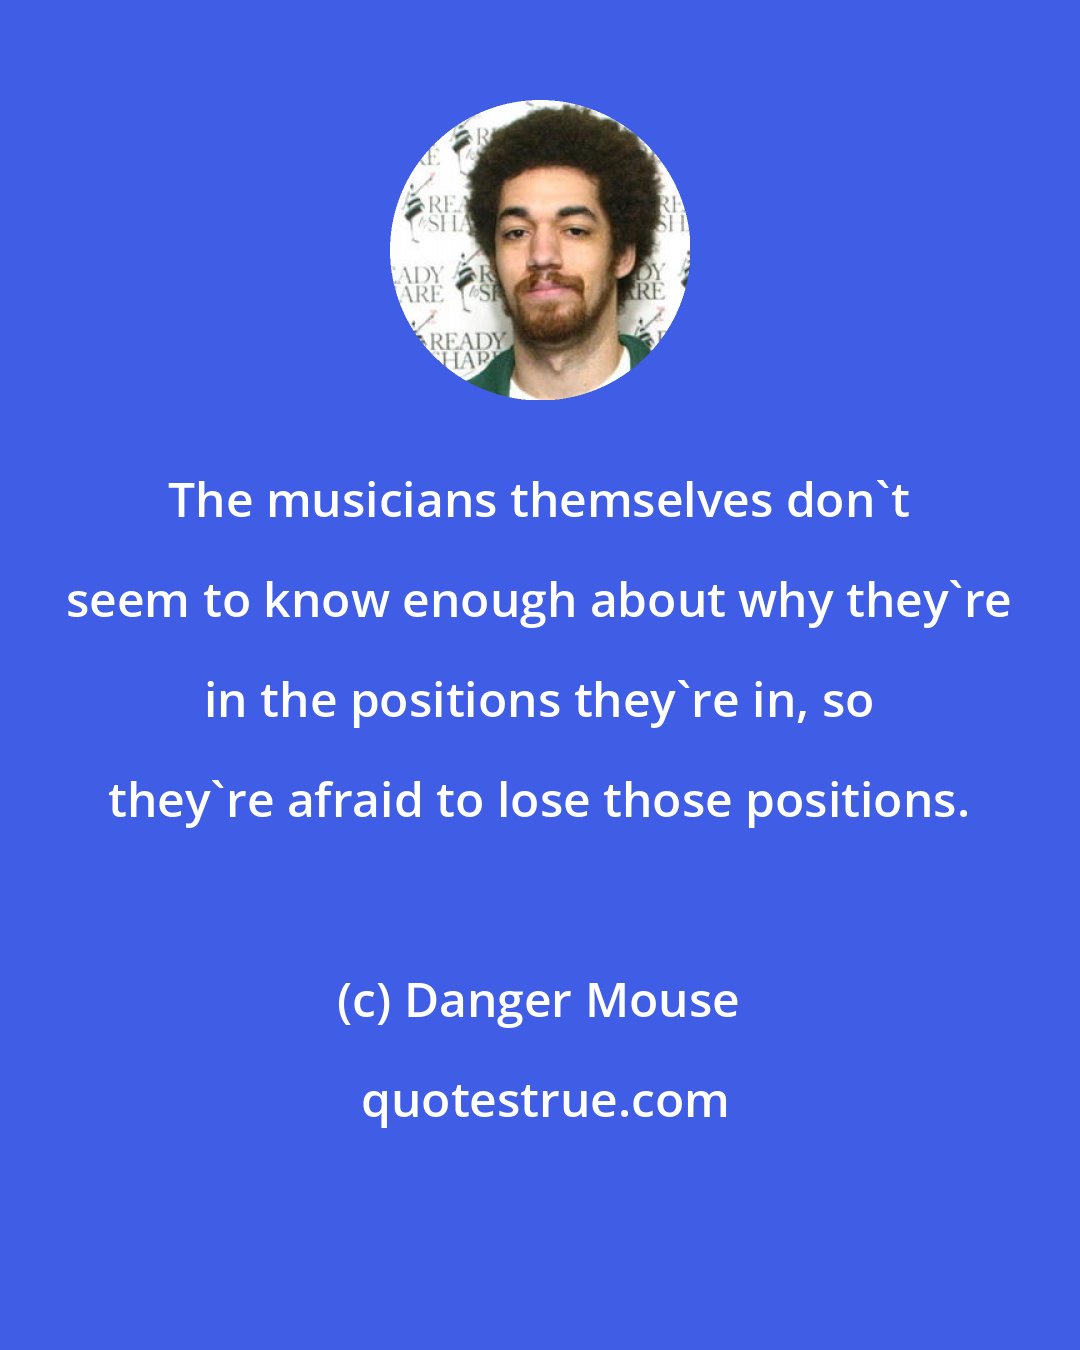 Danger Mouse: The musicians themselves don't seem to know enough about why they're in the positions they're in, so they're afraid to lose those positions.